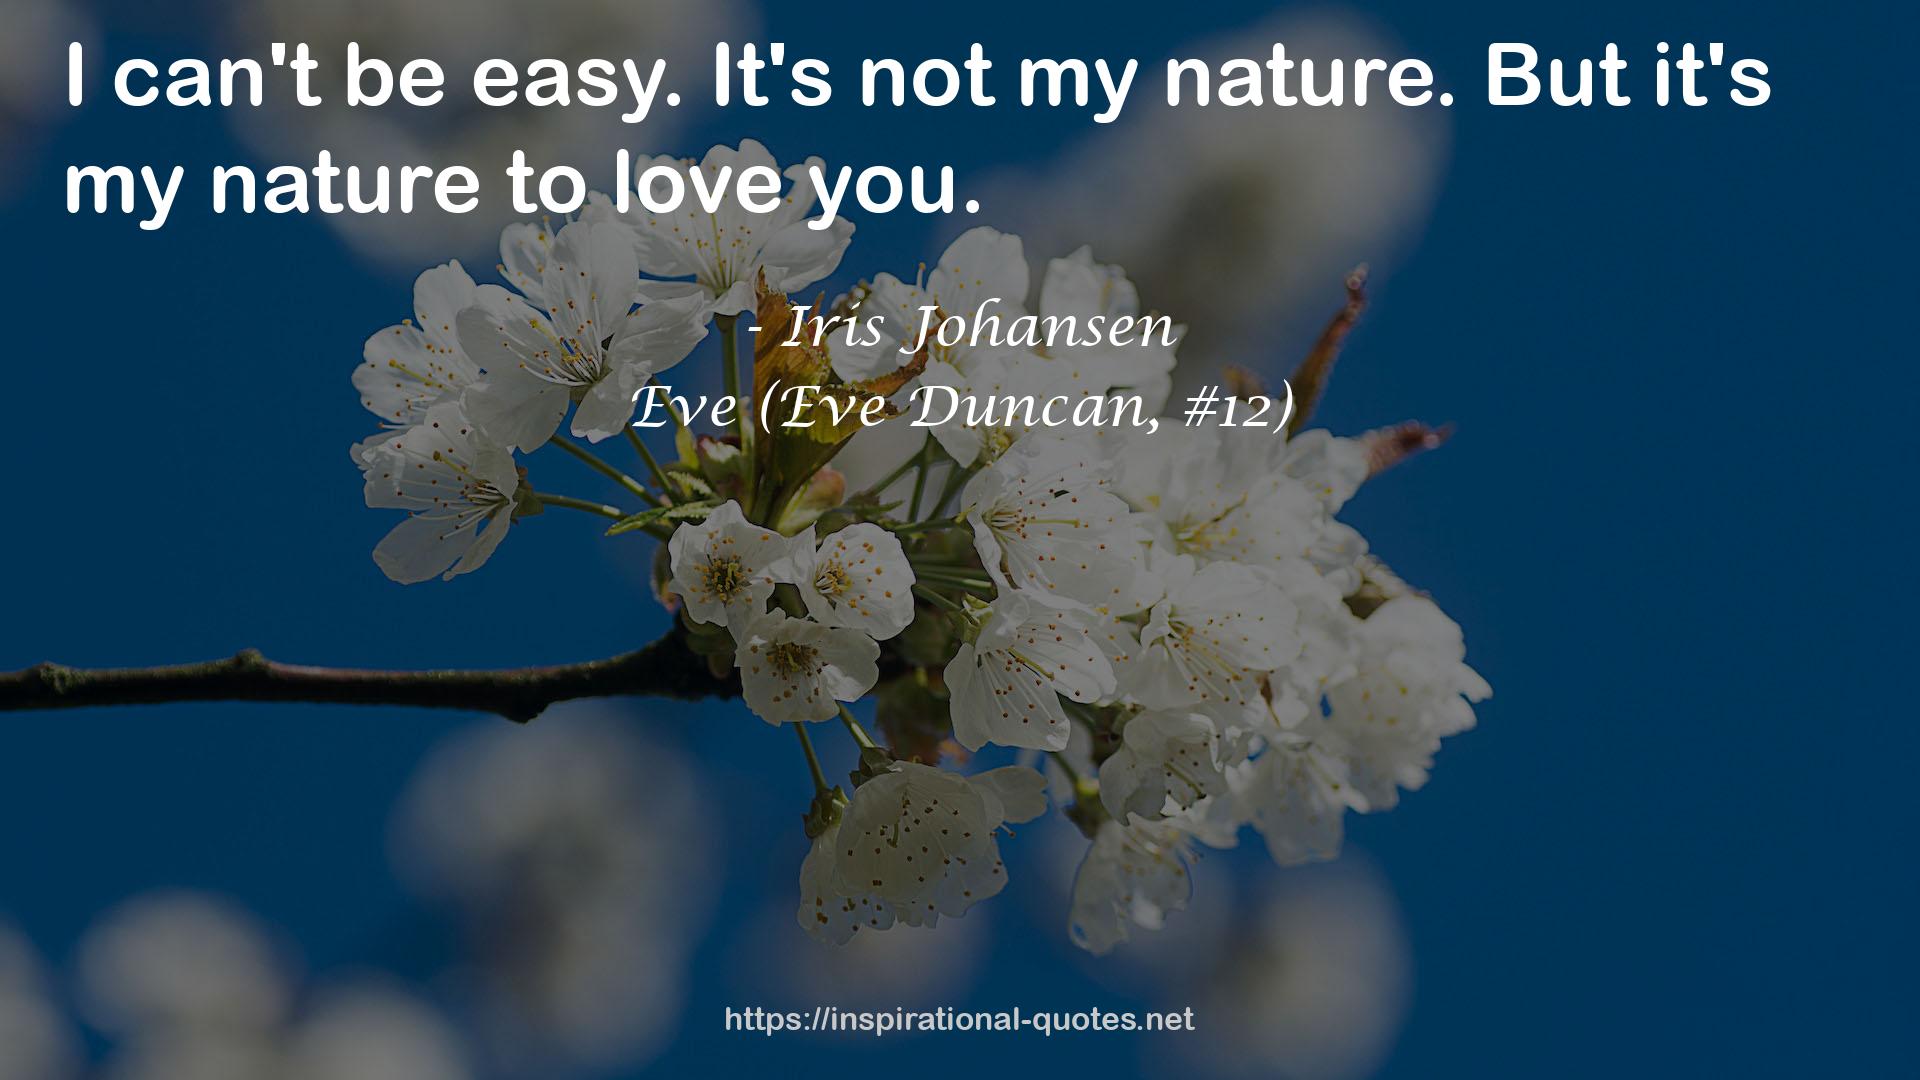 Eve (Eve Duncan, #12) QUOTES